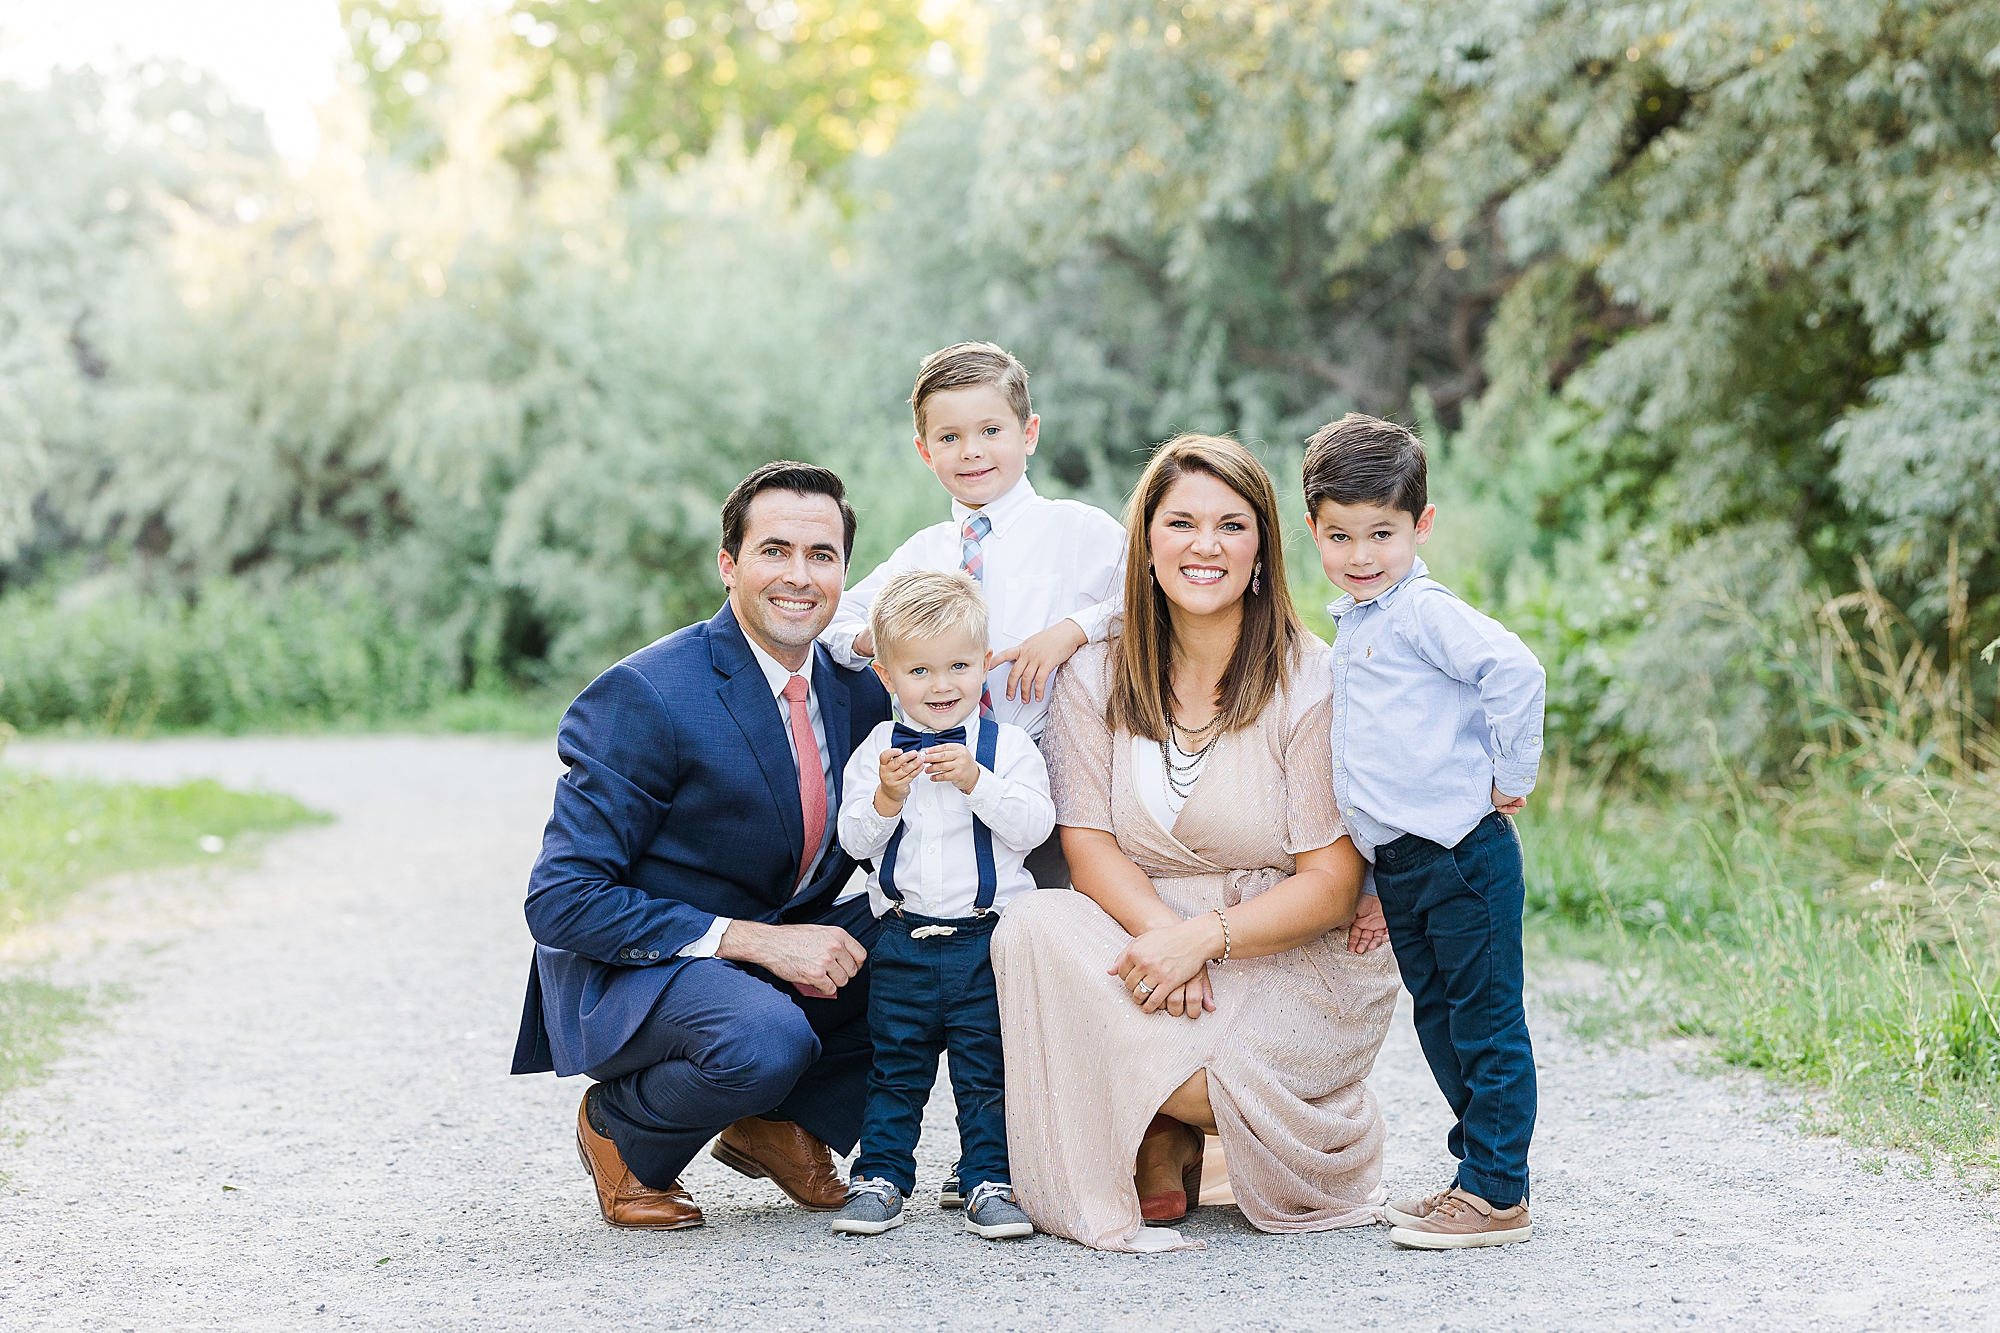 Styling the Little Boys for Your Family Session! If you have several little boys in your family, it can be really tricky to figure out how to mix things up to create a visually rich style. Let me help you out!